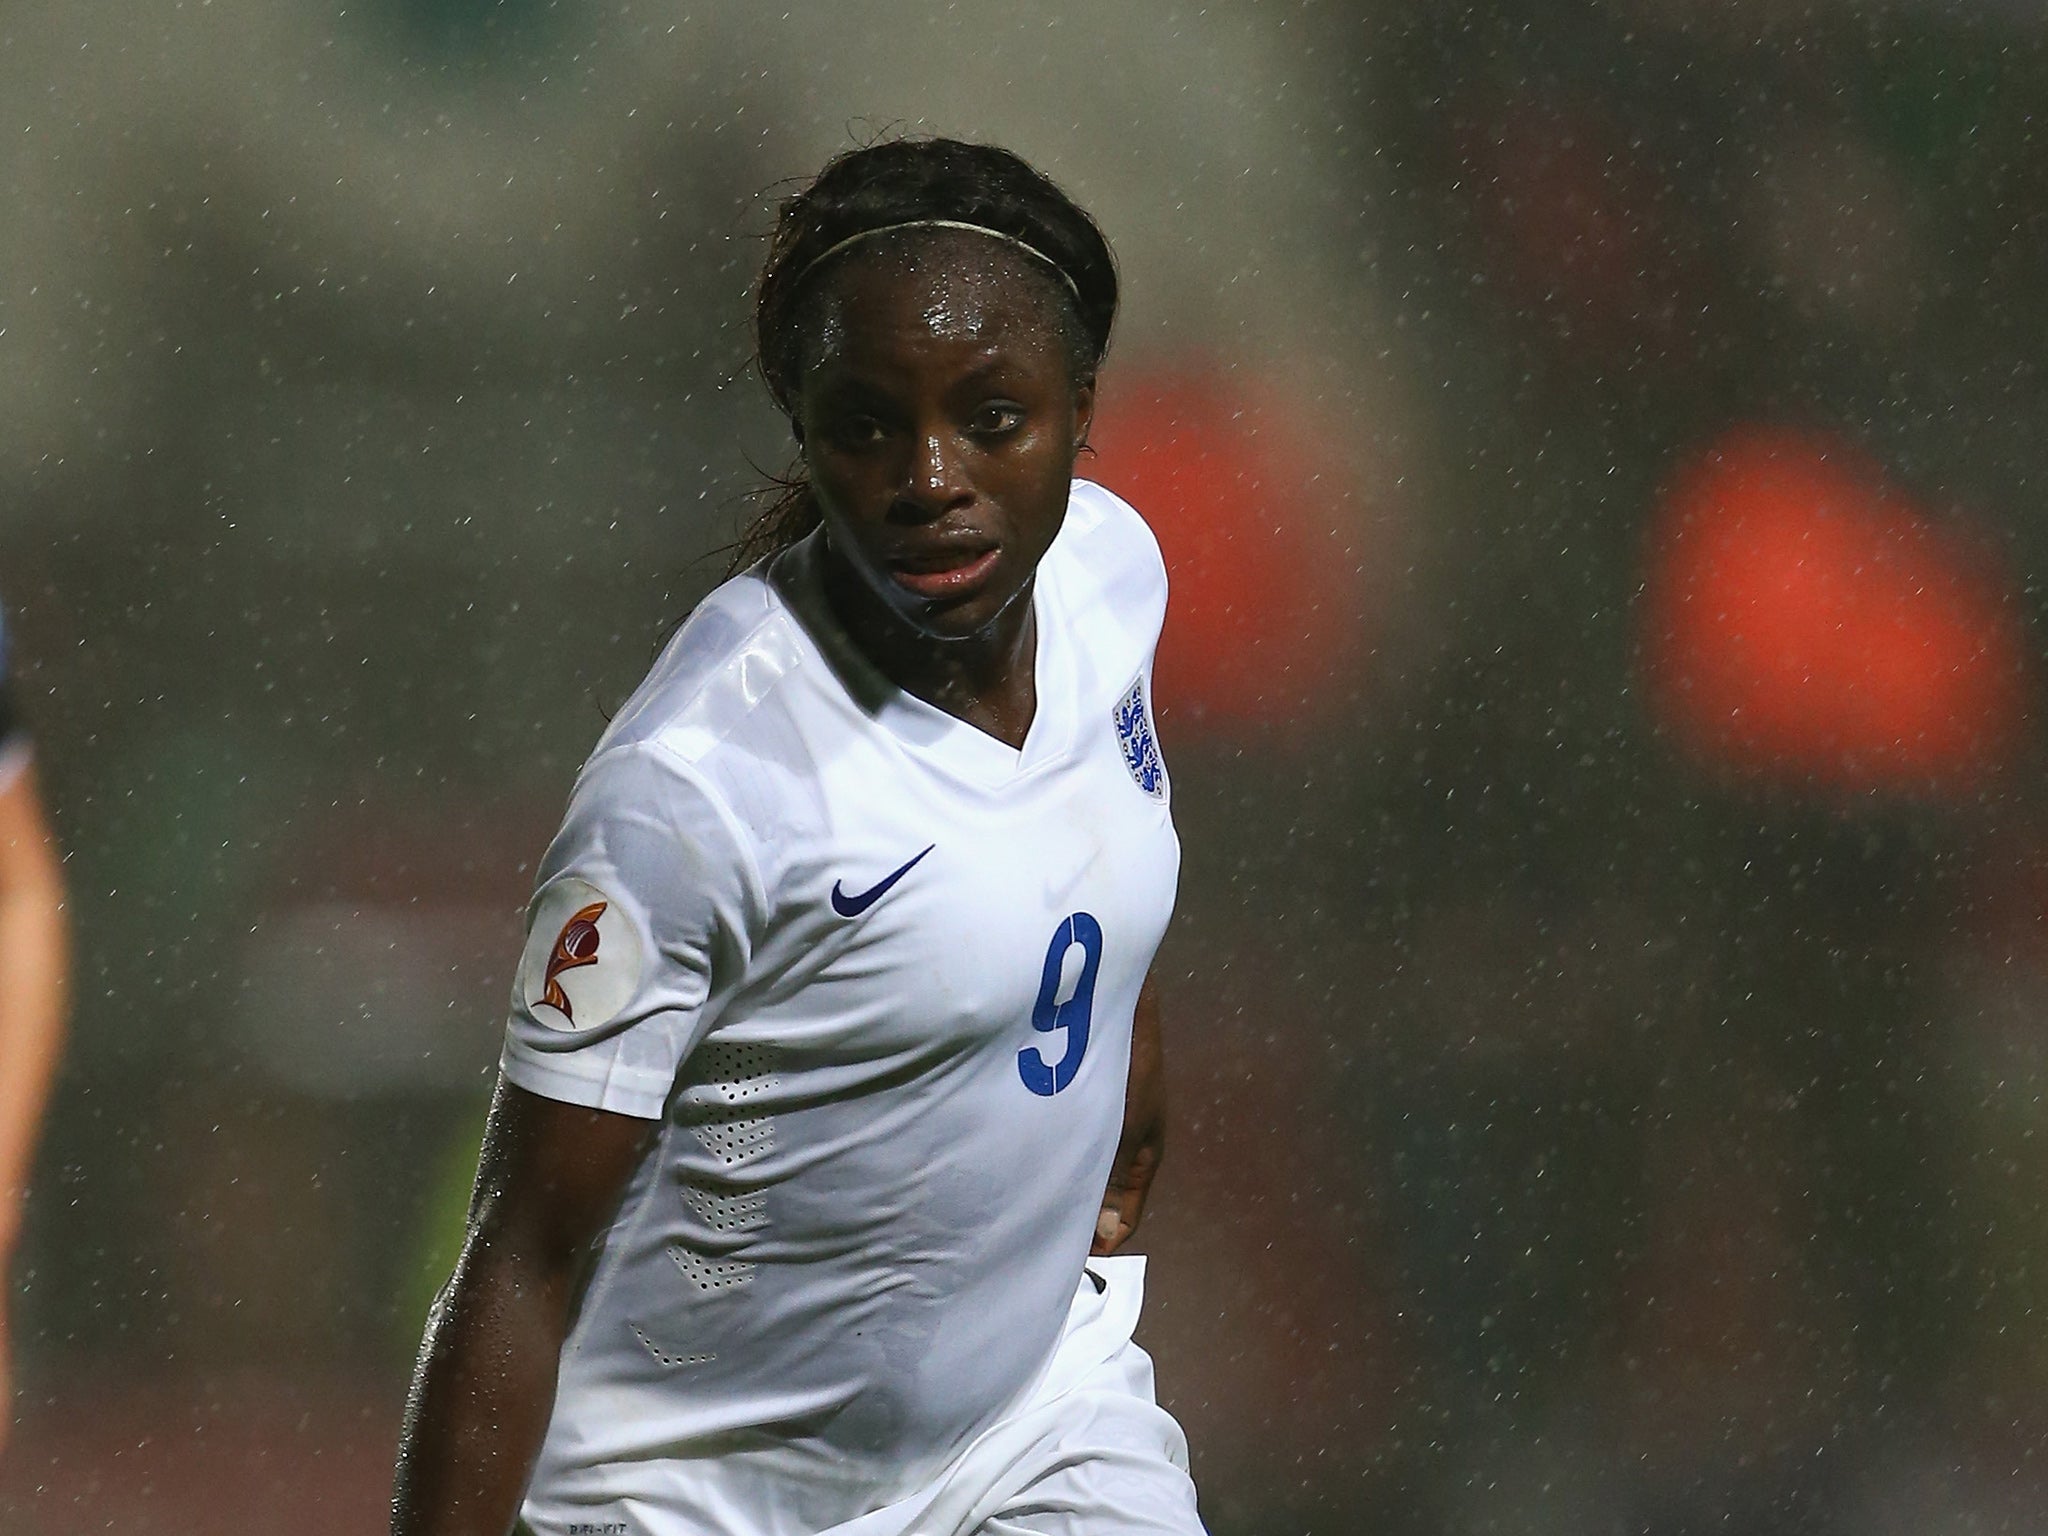 Aluko claims she was subject to racism by Sampson